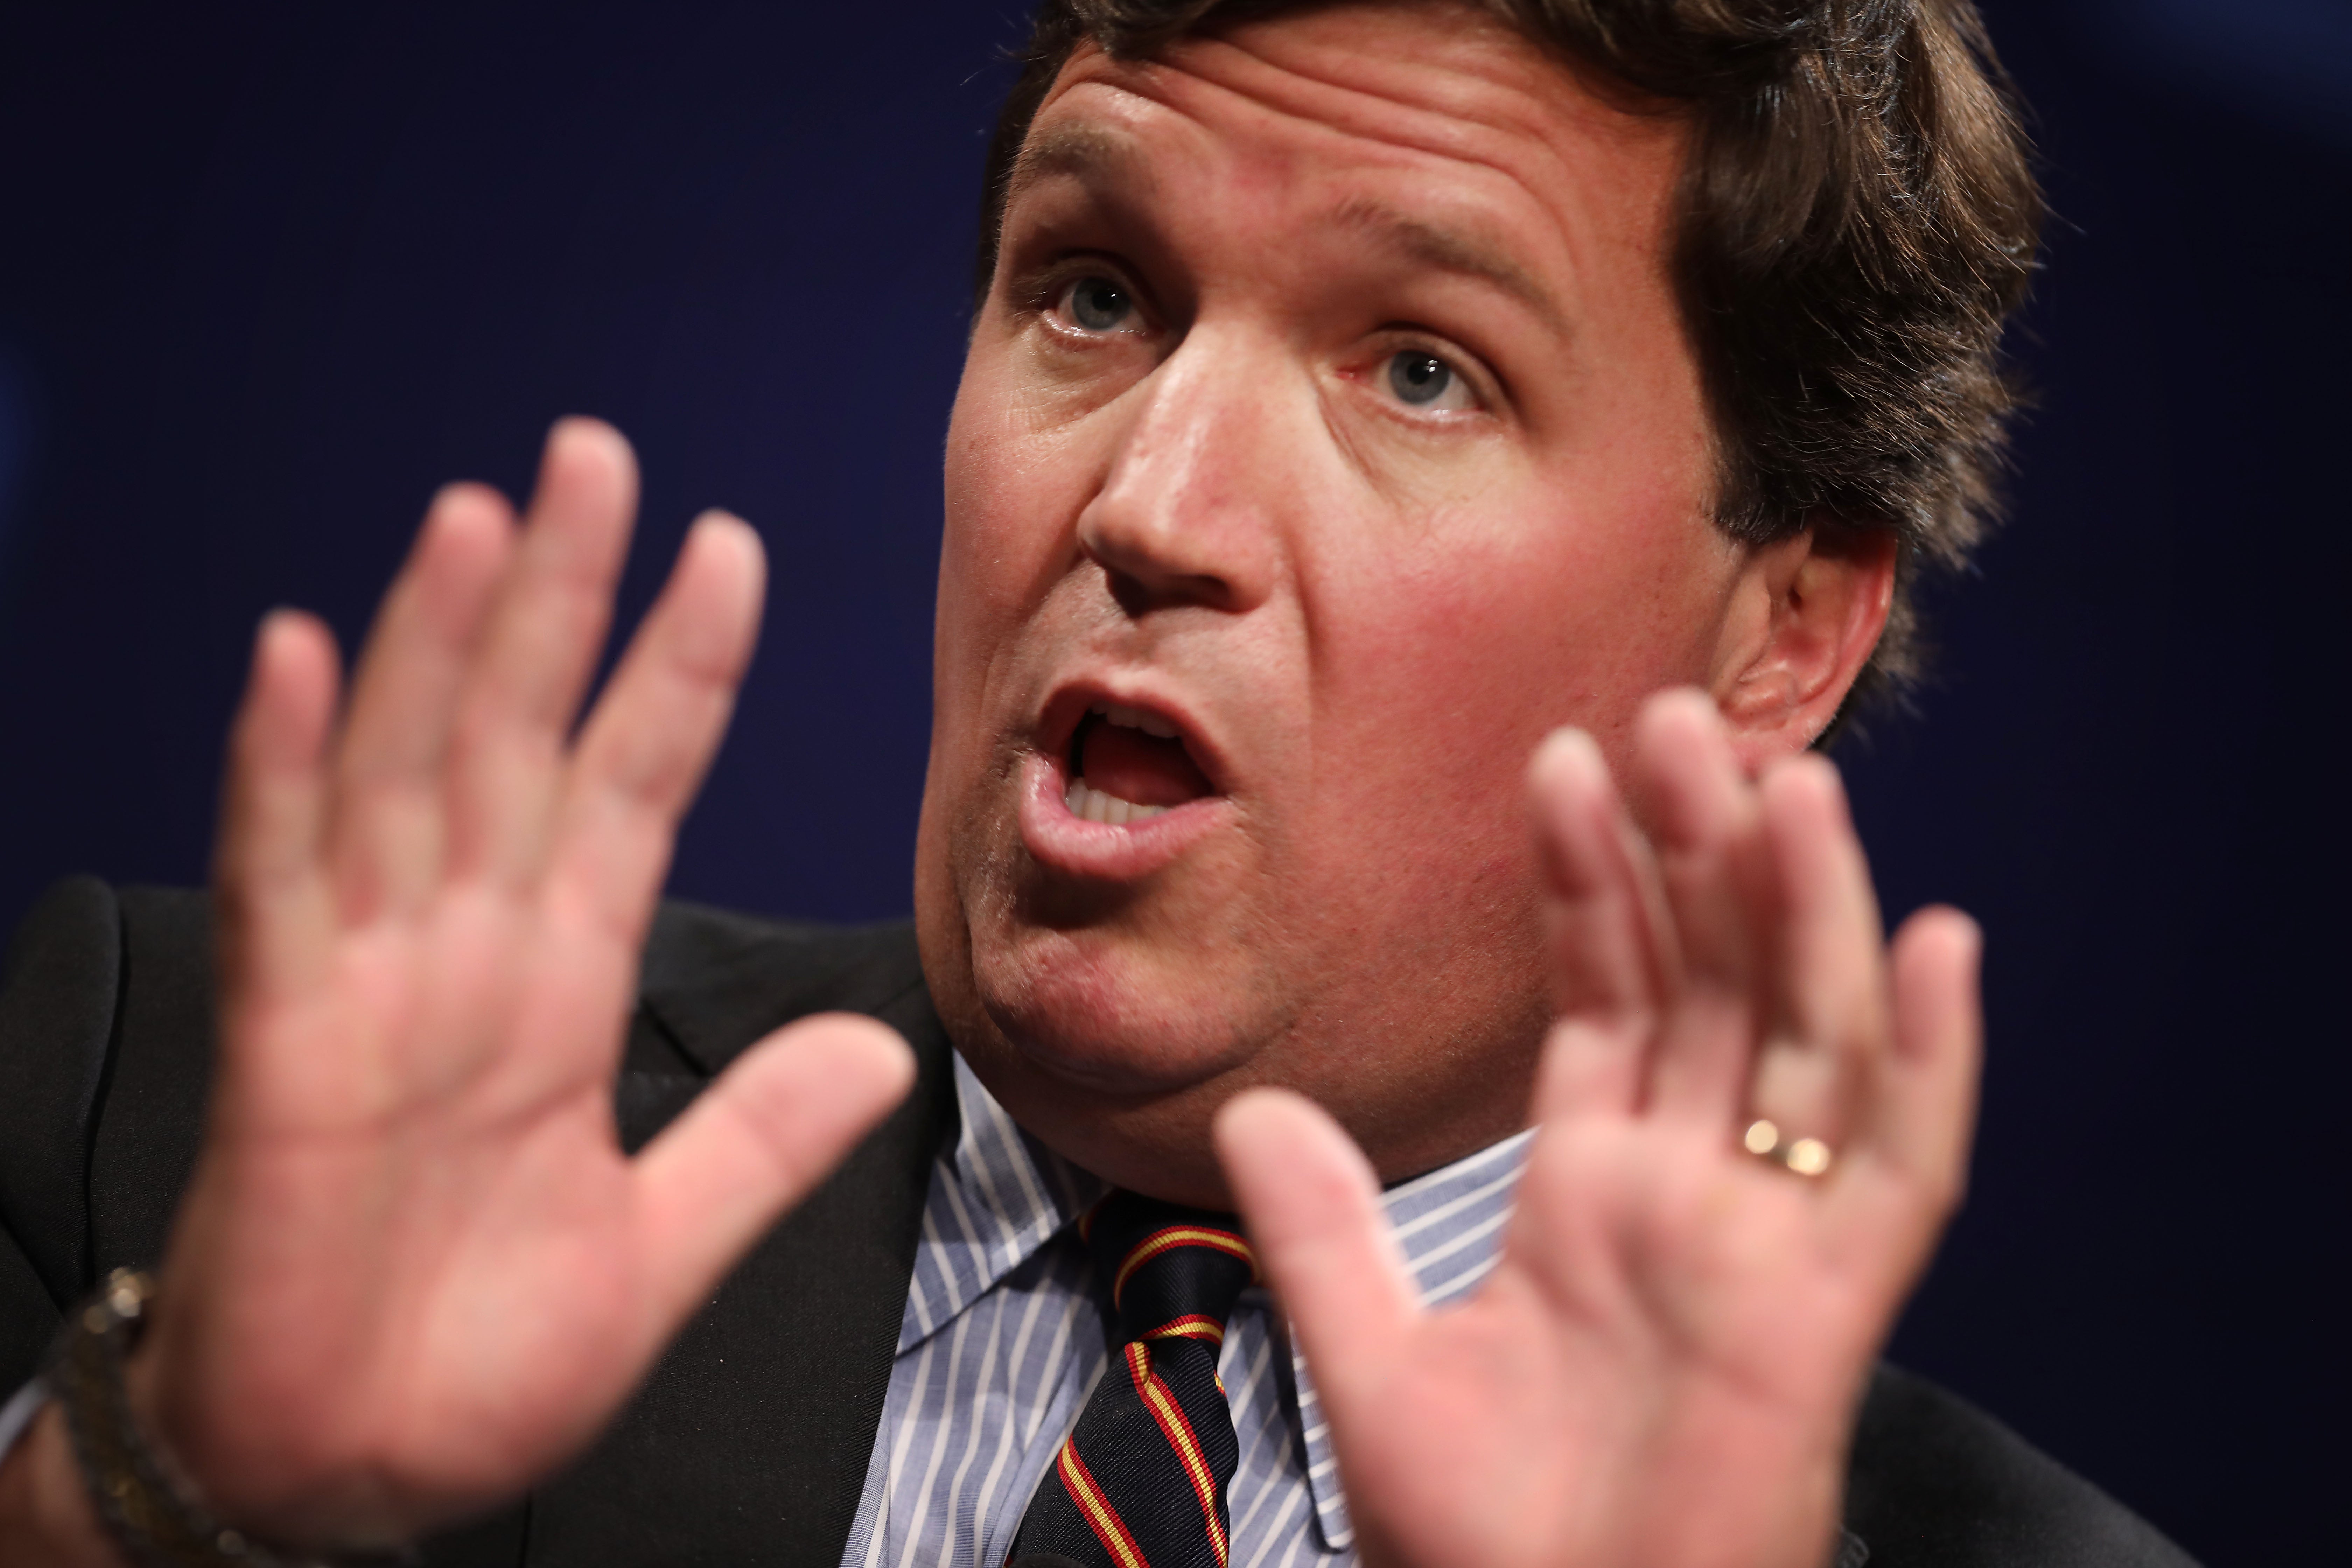 Fox News reportedly has an opposition file on Tucker Carlson, sources claim